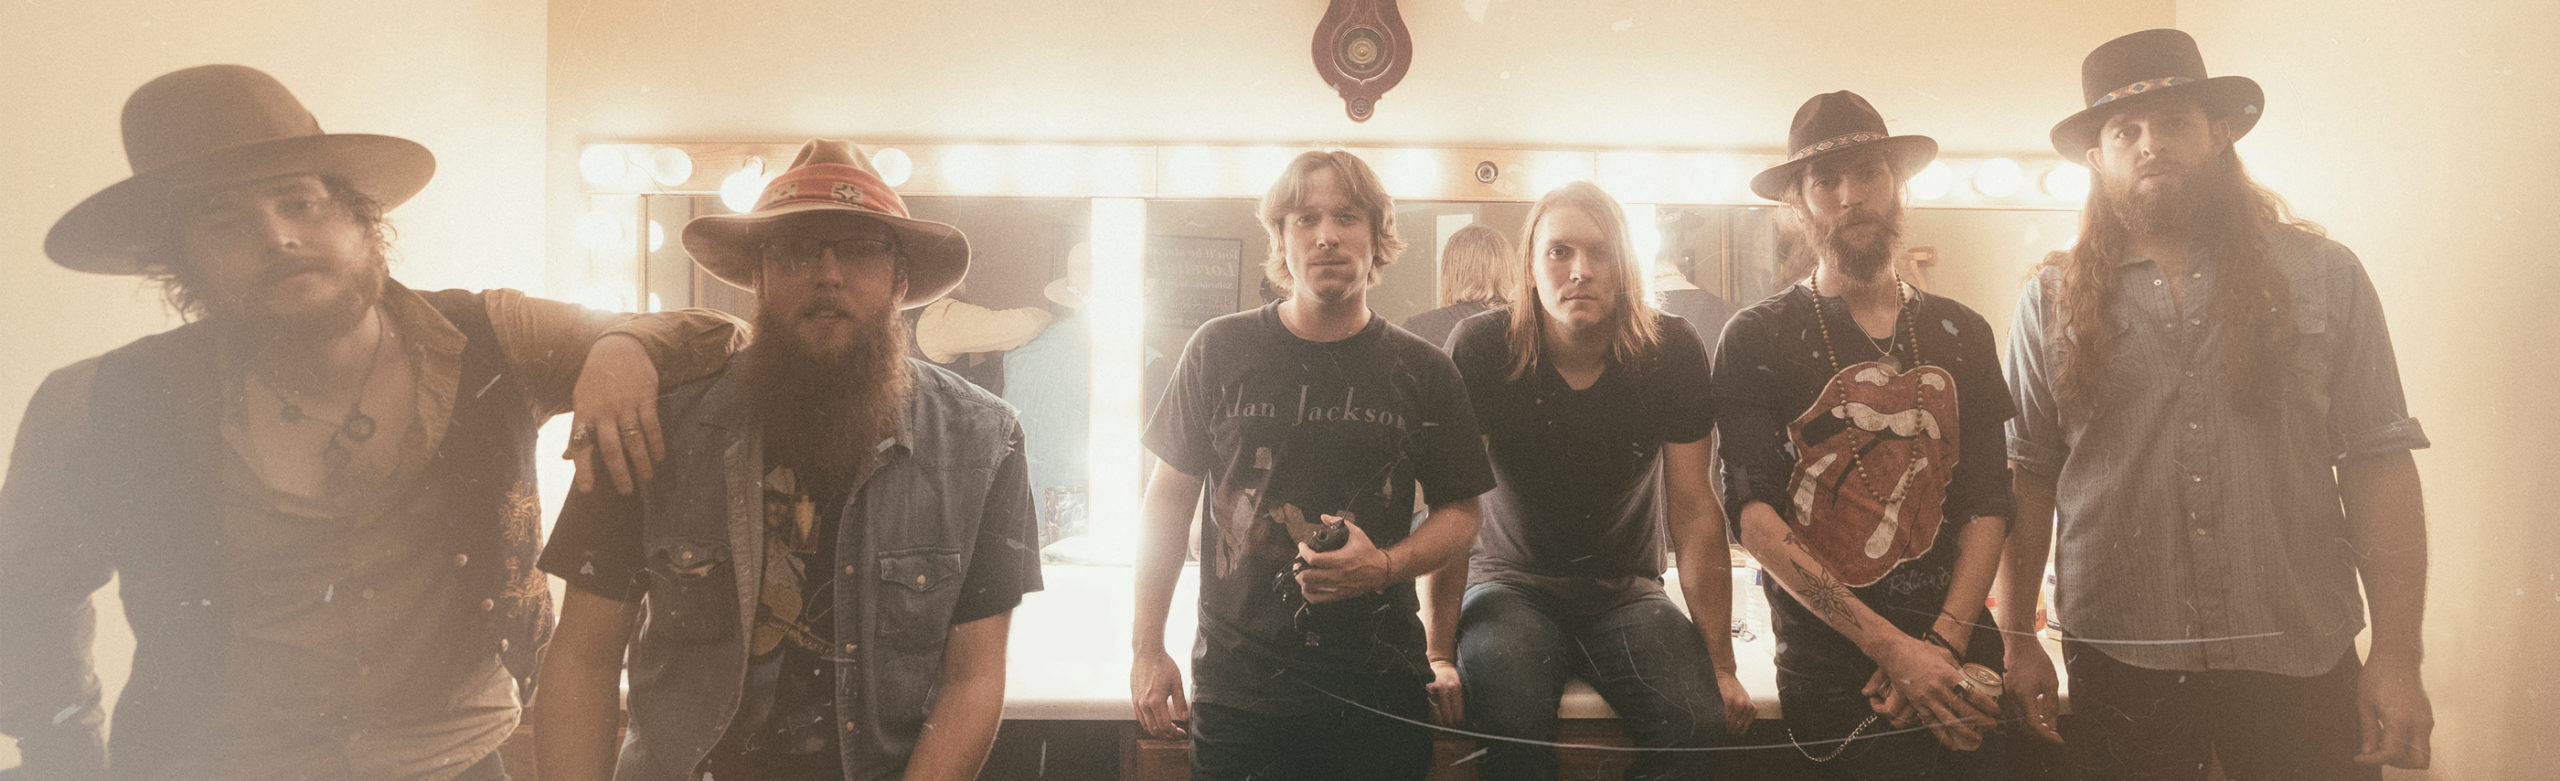 Whiskey Myers Tickets + Vinyl & Signed Insert Giveaway Image